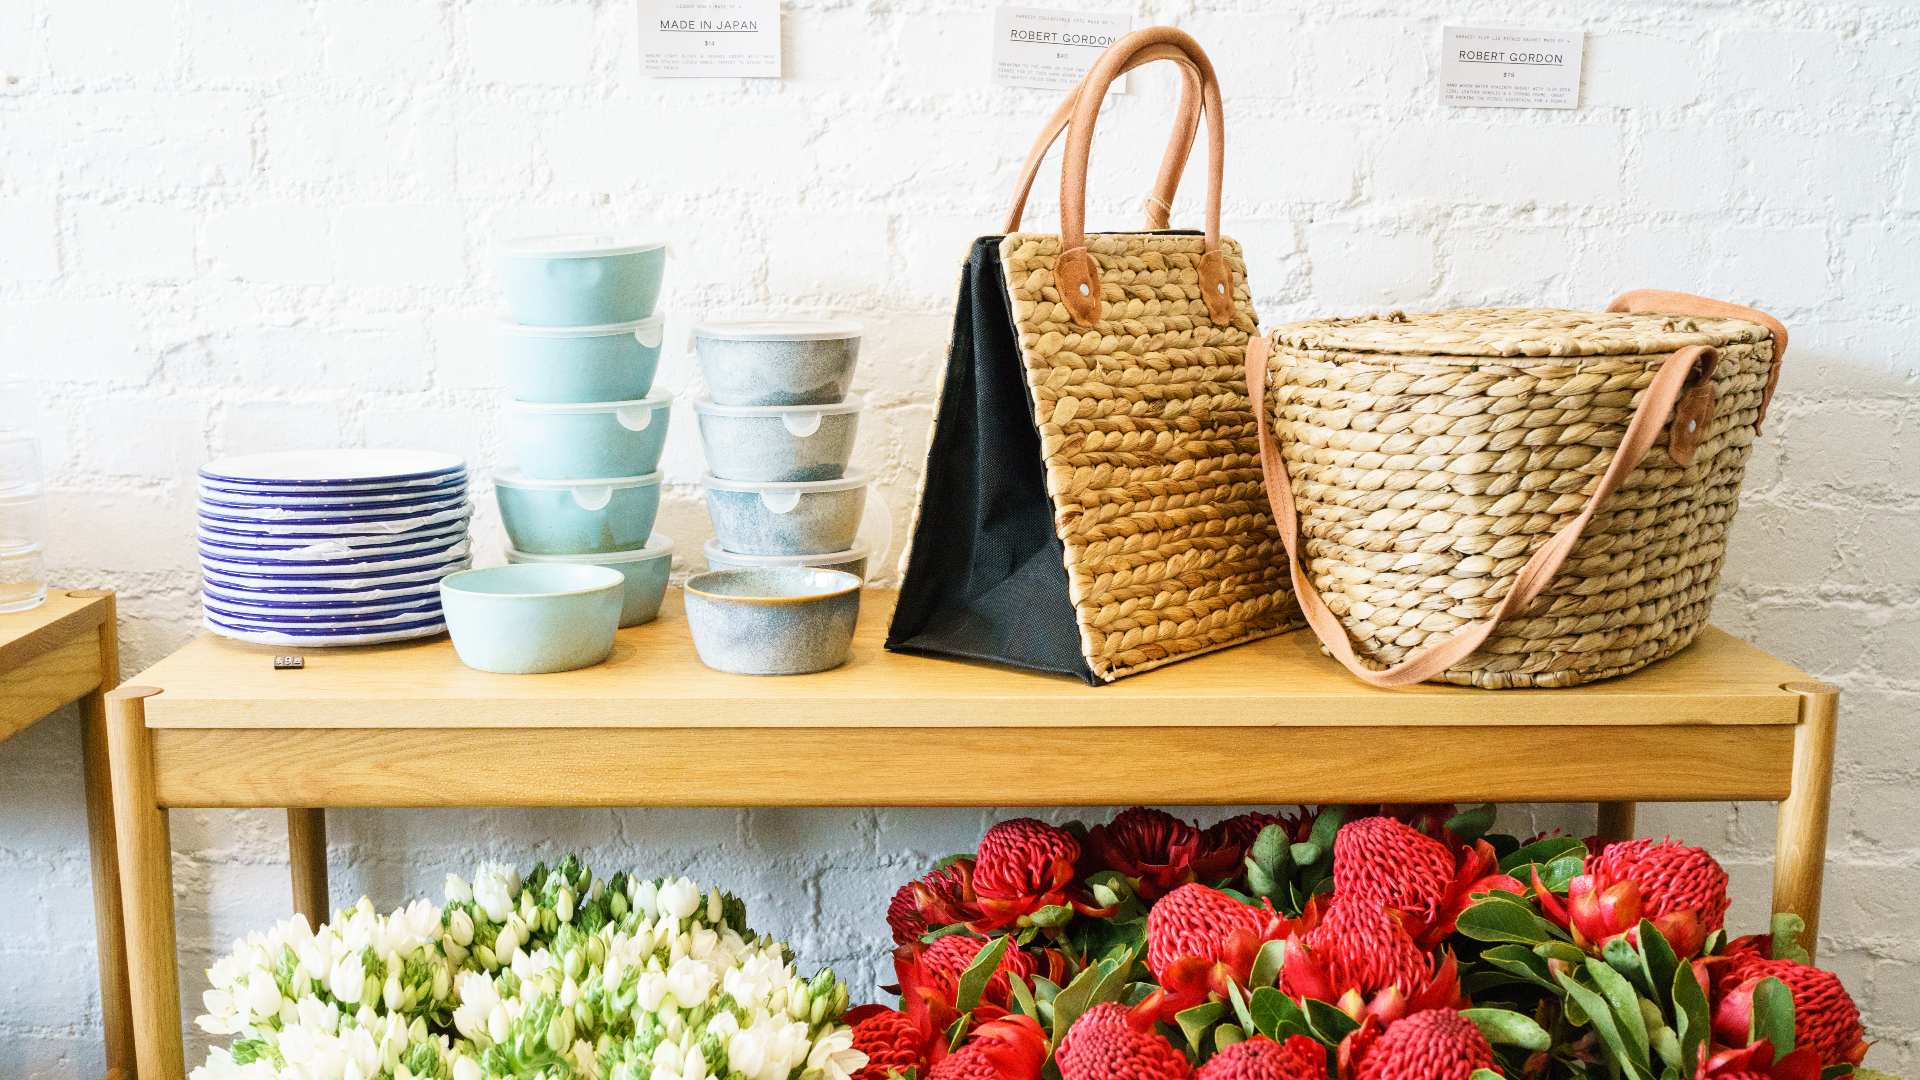 Morning Market Is Andrew McConnell's New Euro-Style Grocer on Gertrude Street